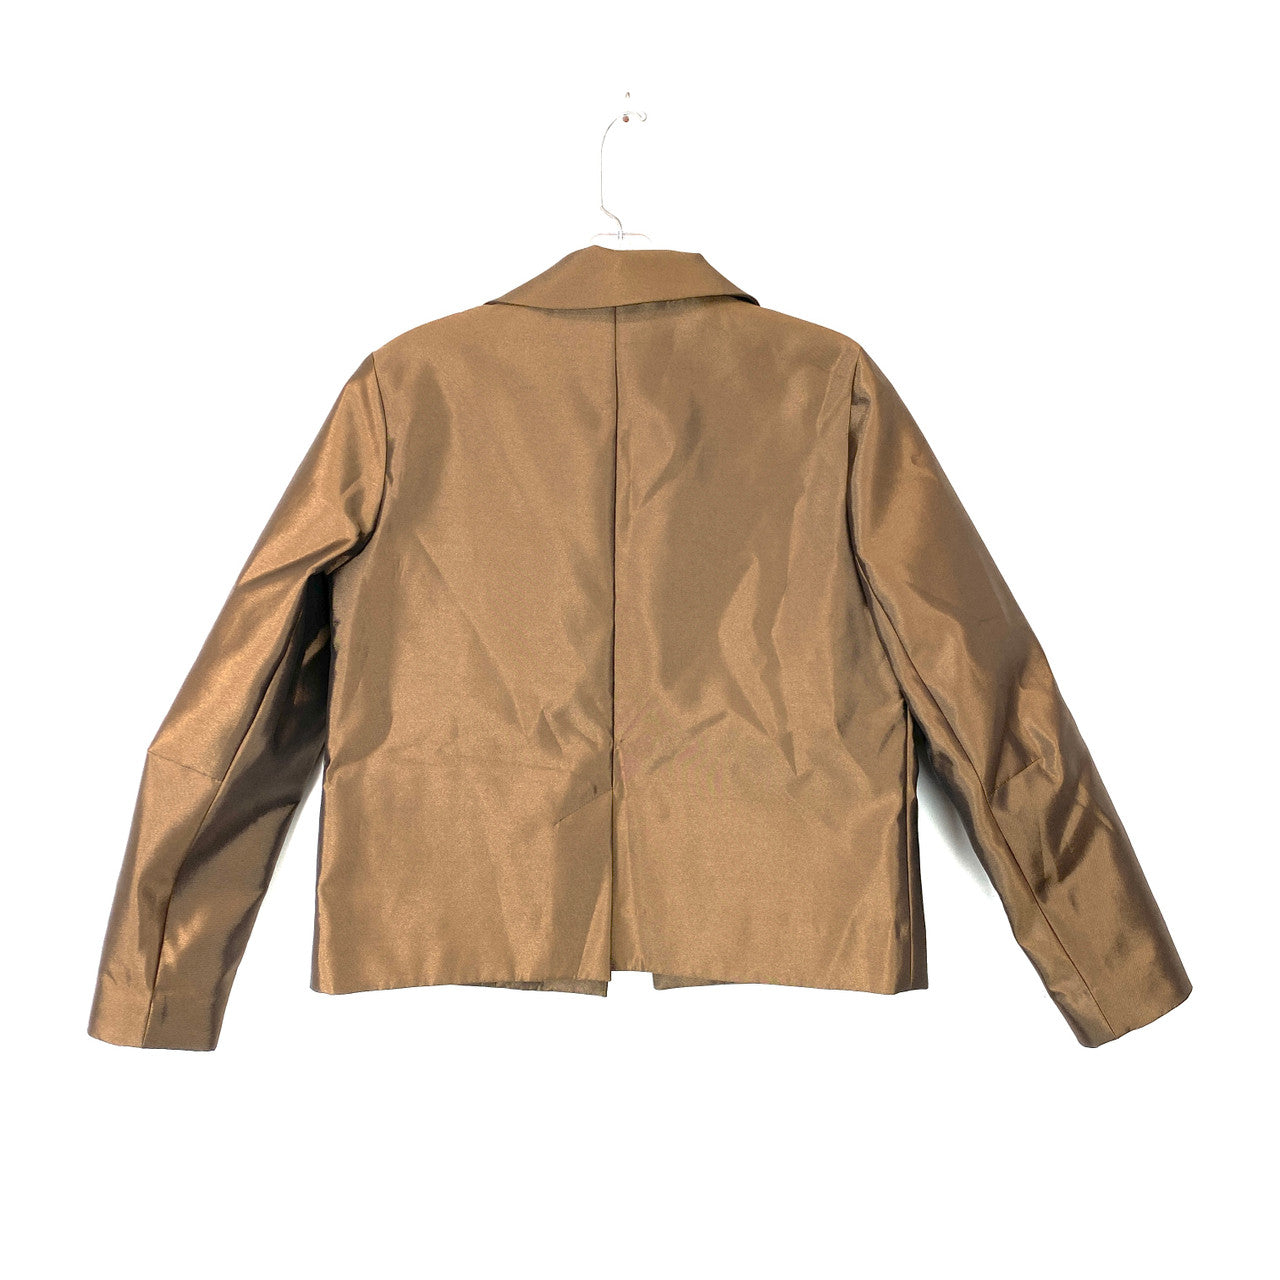 COS Chocolate Brown Boxy Jacket - Back